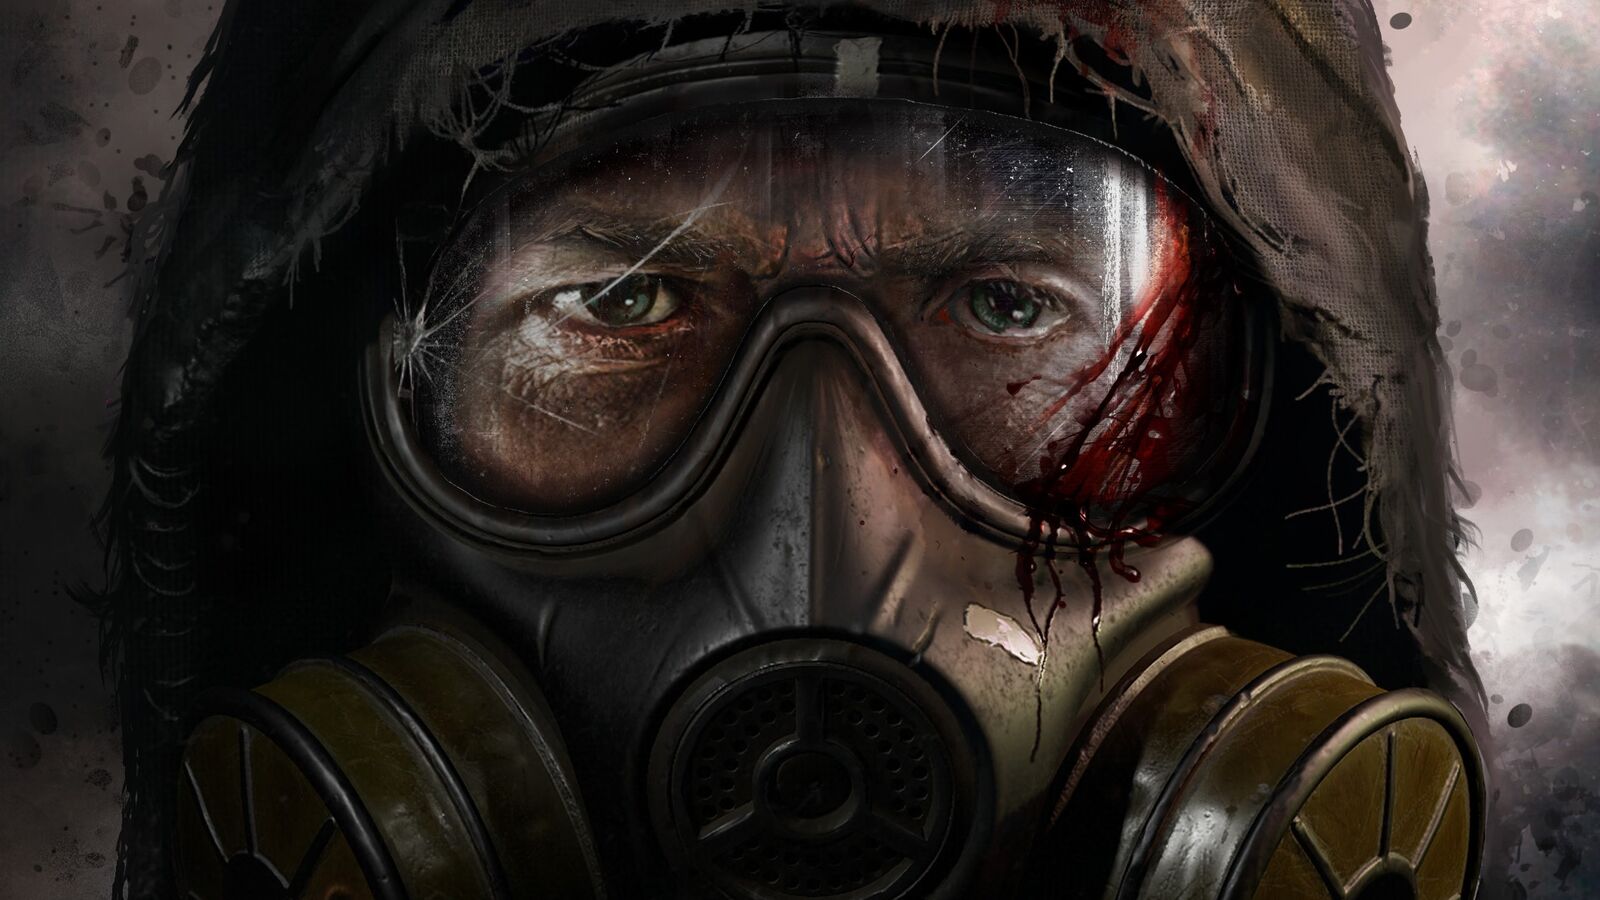 Rumor: the first S.T.A.L.K.E.R. is being spoiled on the console